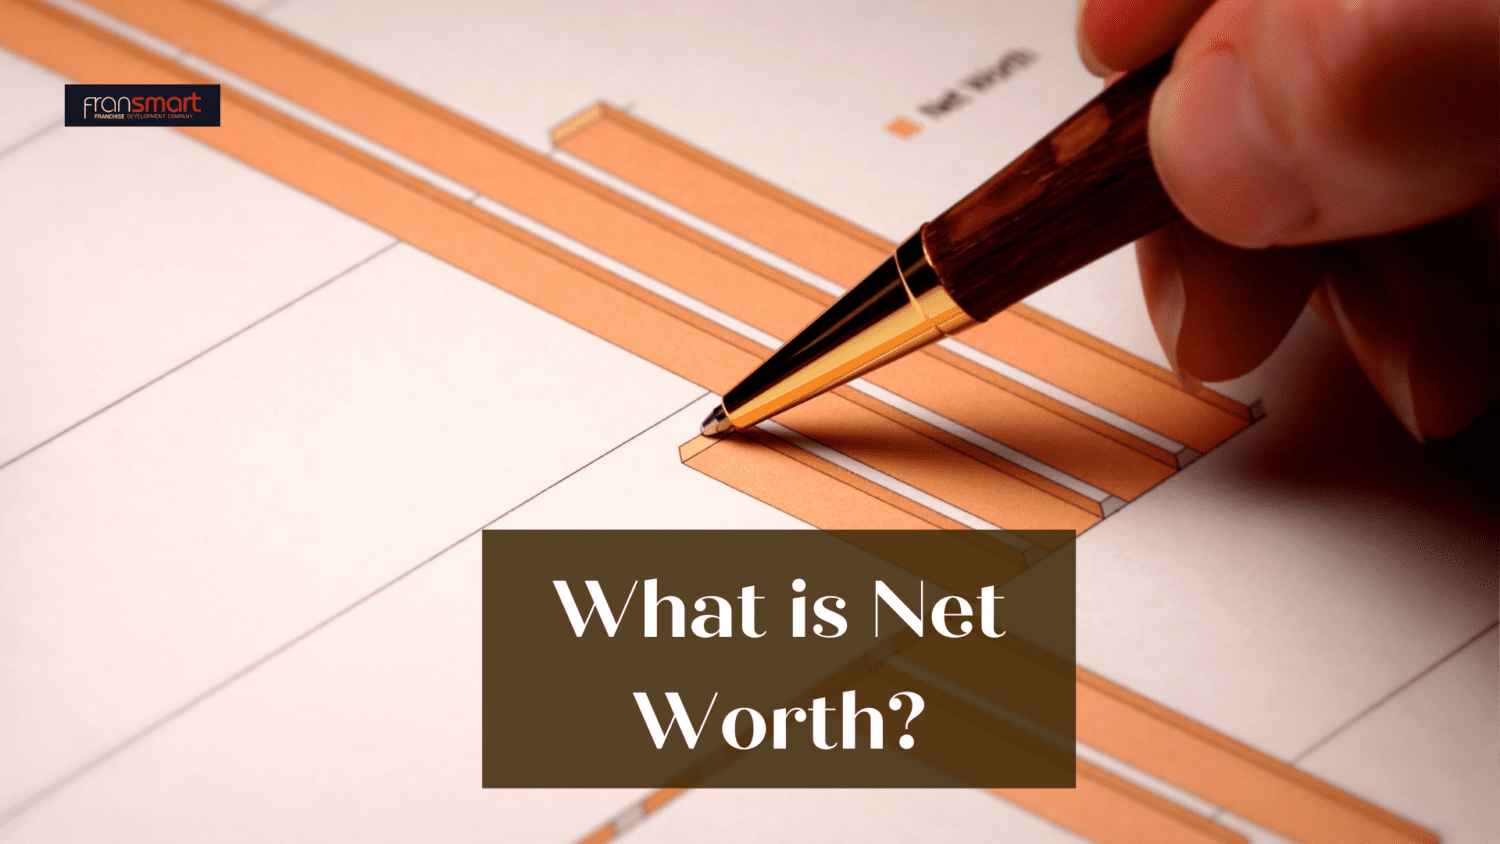 What is Net Worth